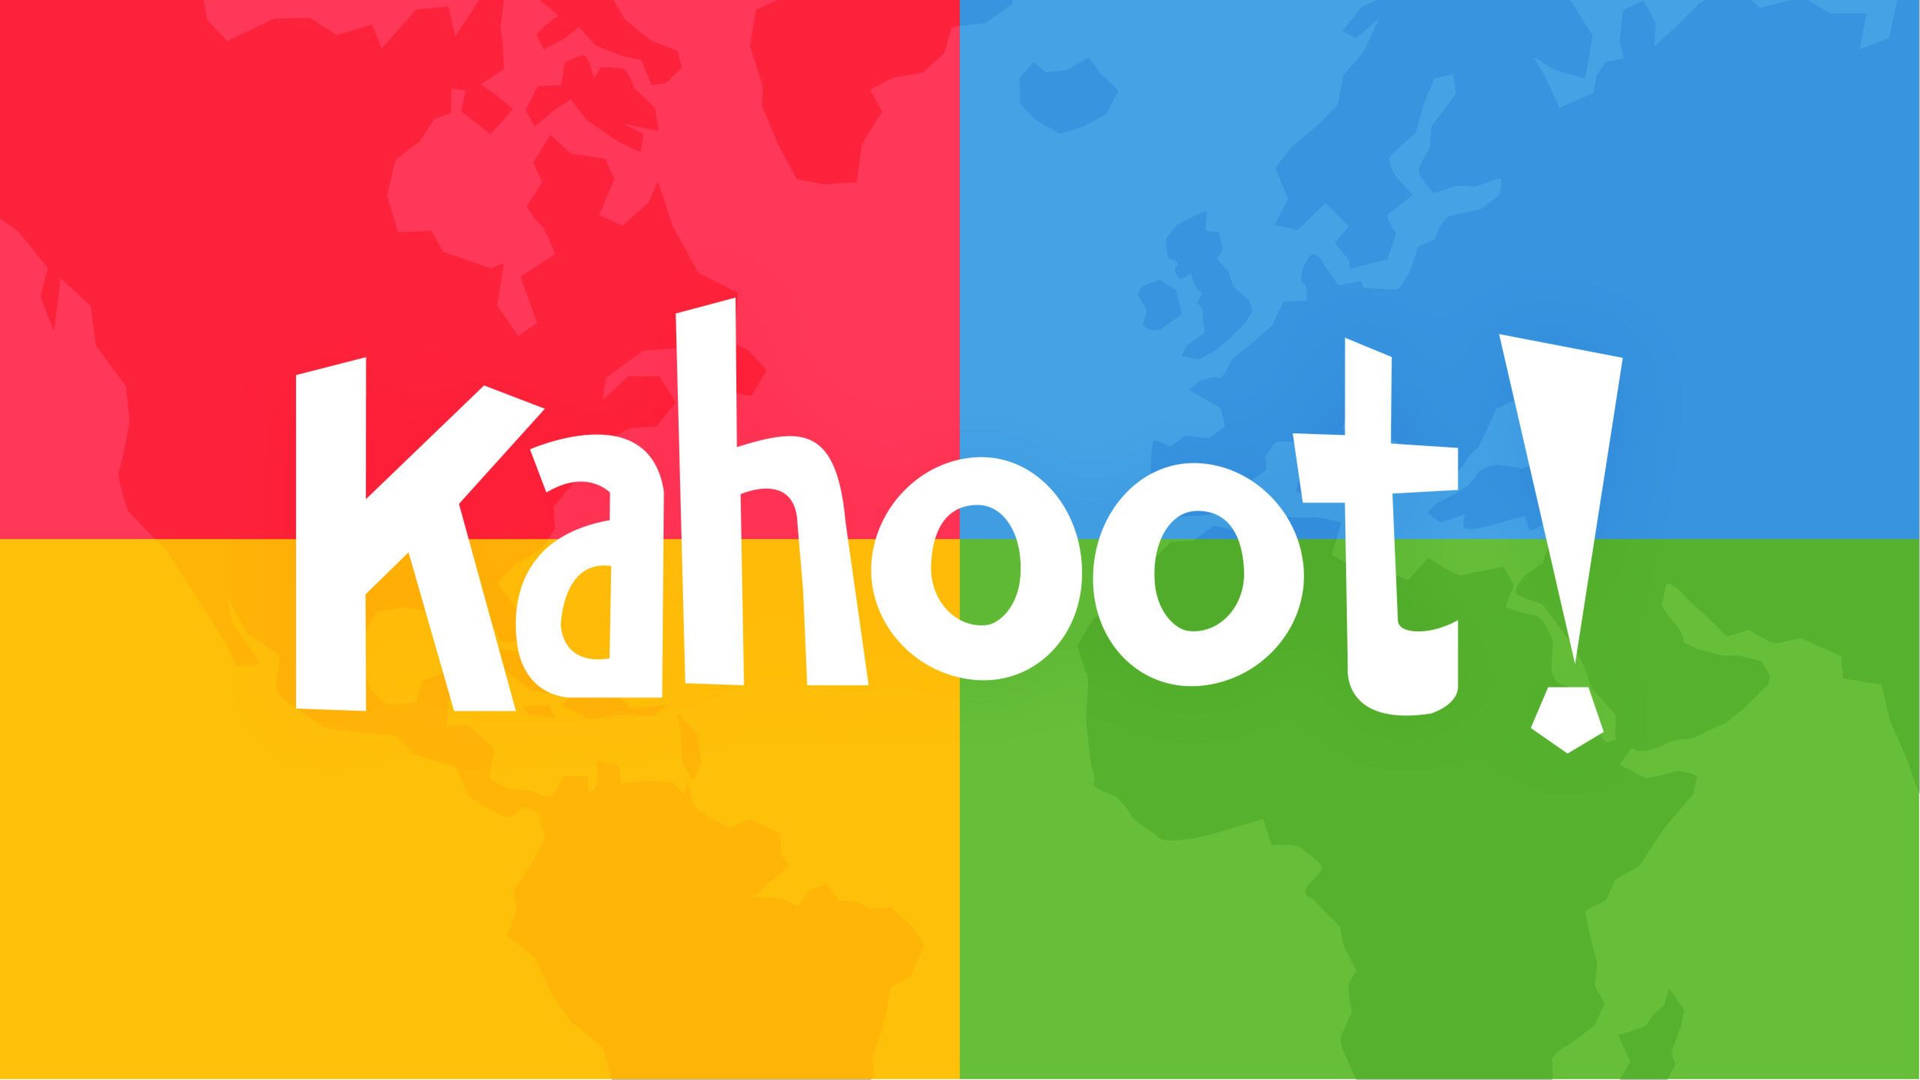 Exciting Kahoot Session In Progress Wallpaper